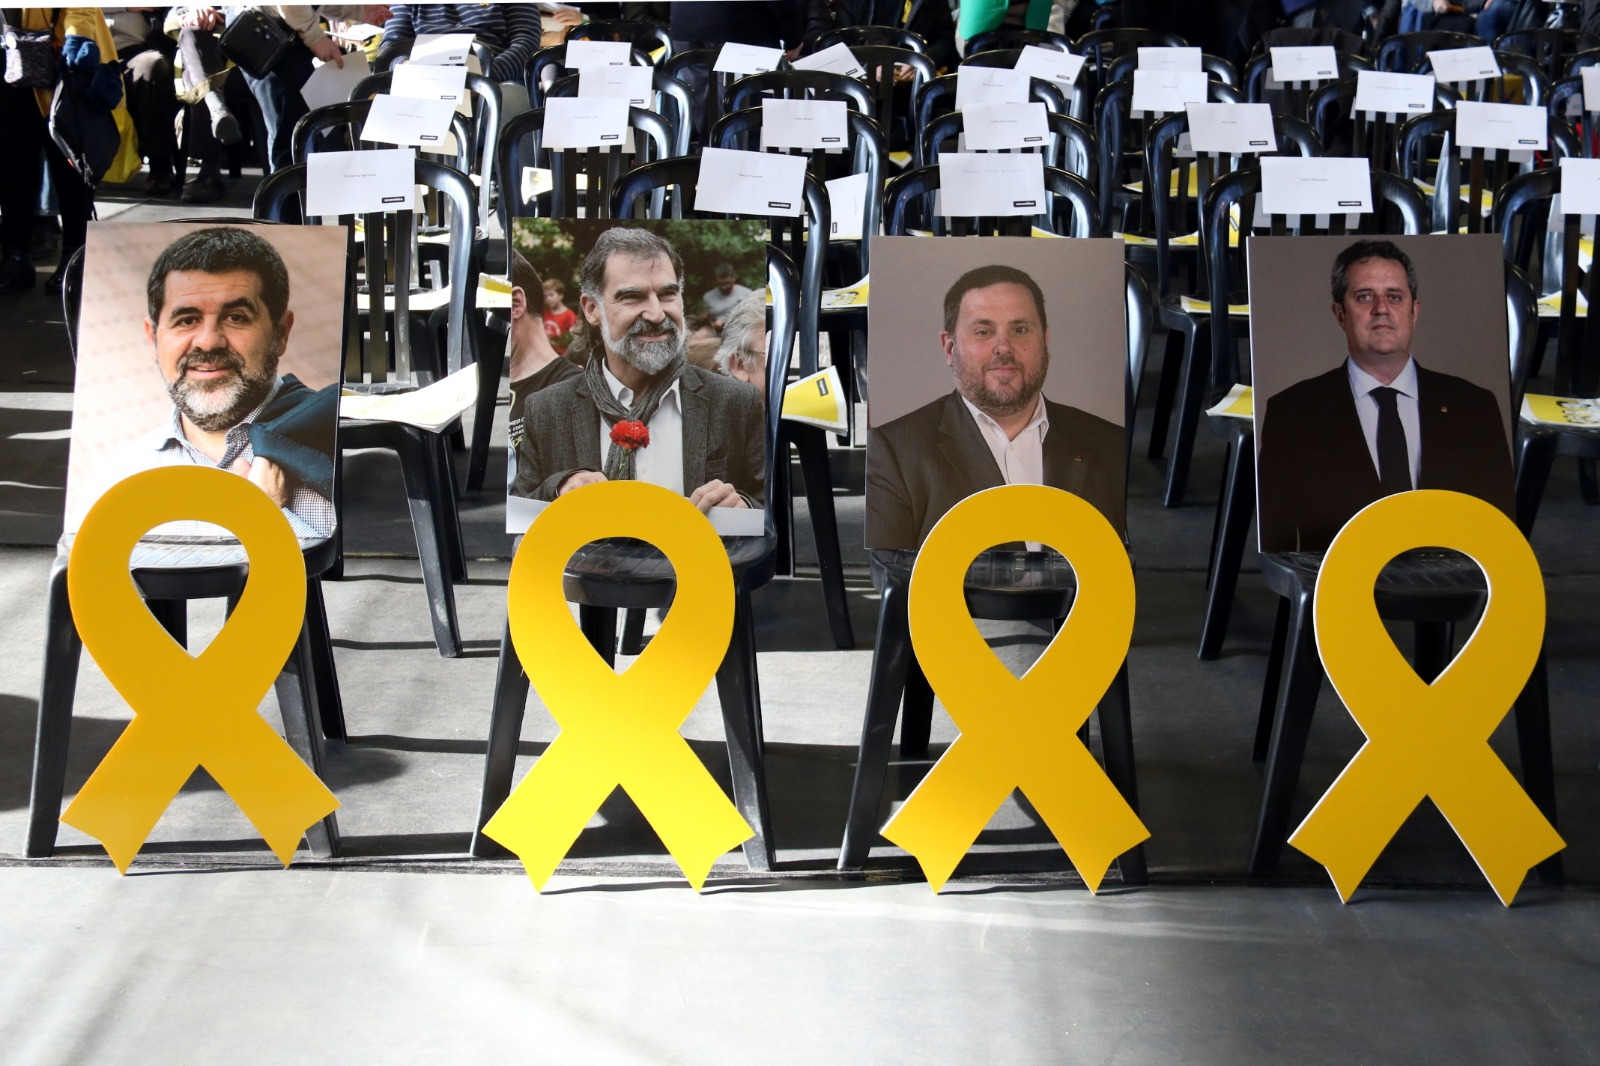 Empty seats and yellow ribbons in solidarity for jailed Catalan leaders (by ACN)